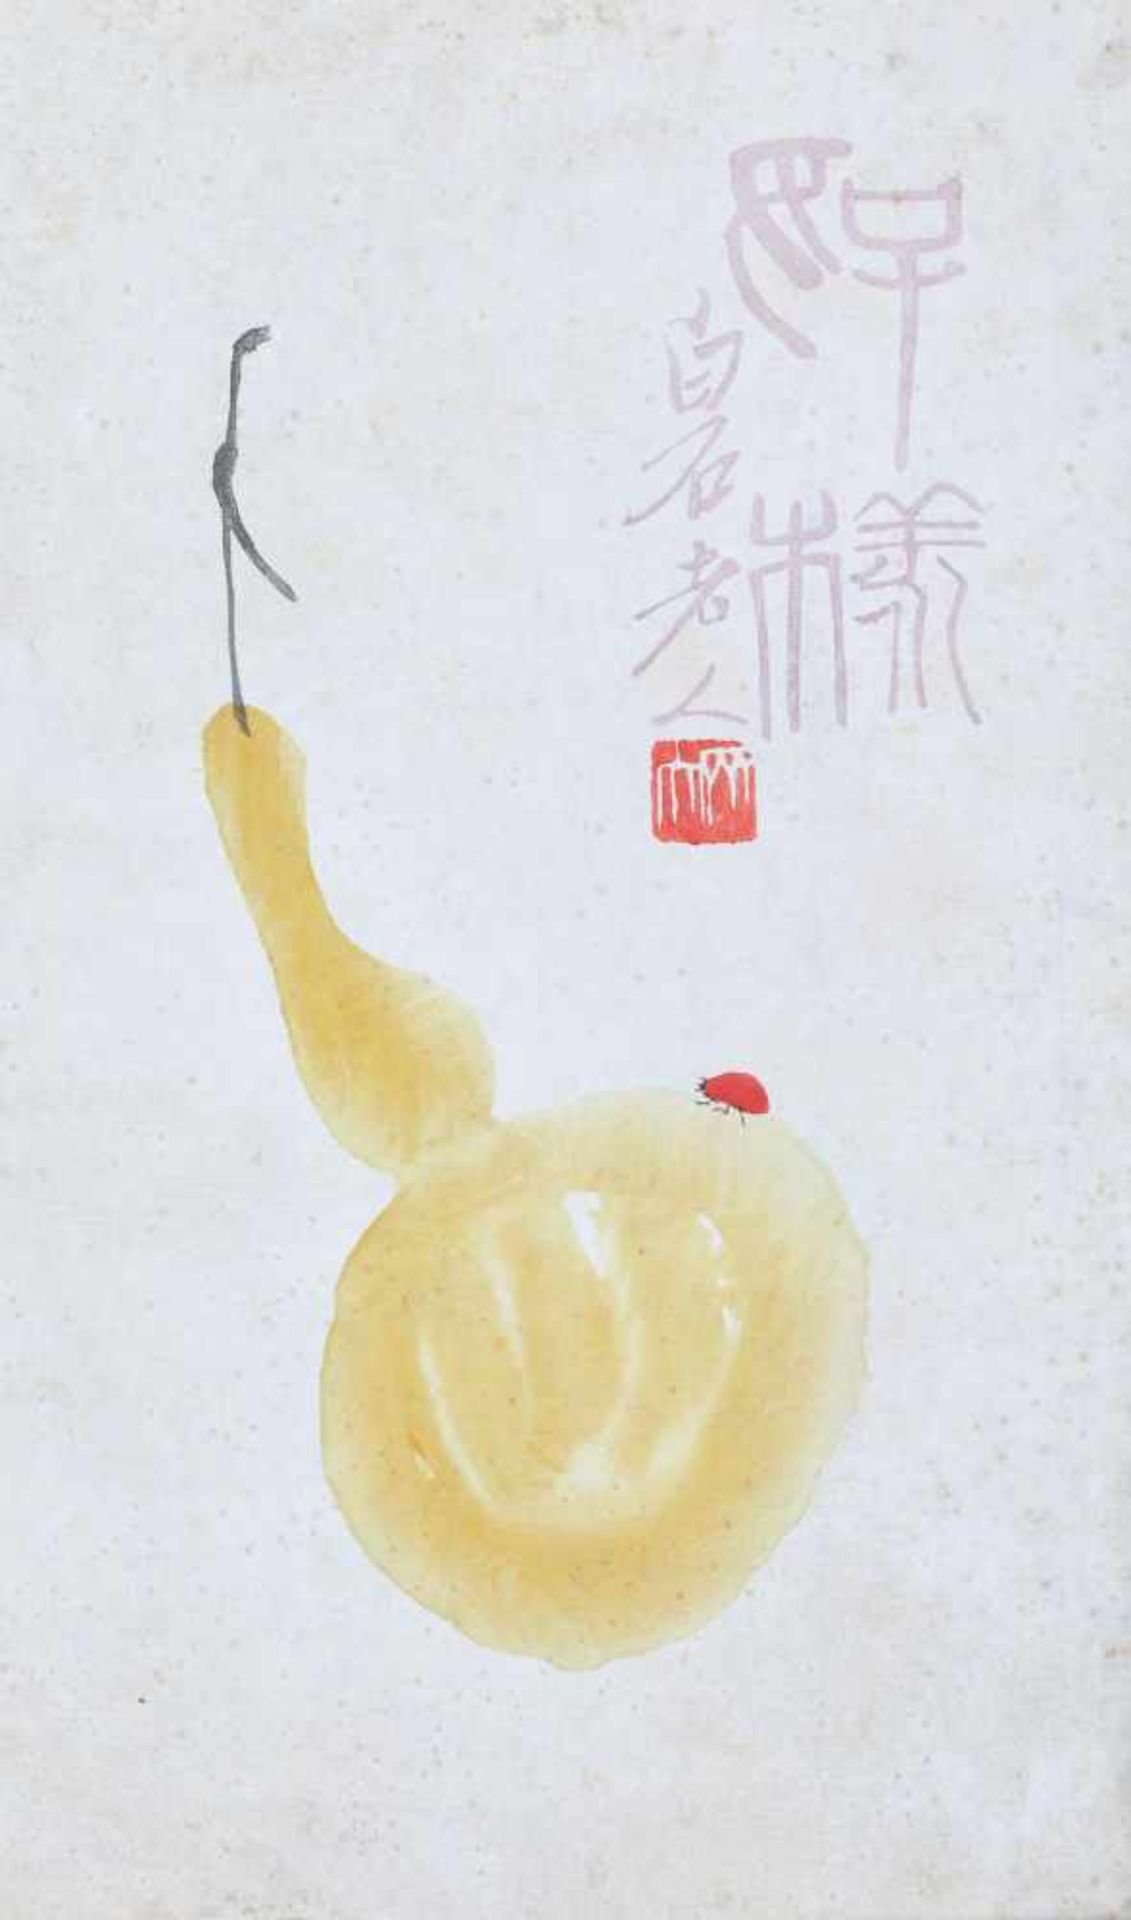 Pear and ladybugPear and ladybug31,5 × 21,5 cmsigned upper right, ”Baishi” și in artist's stampQi